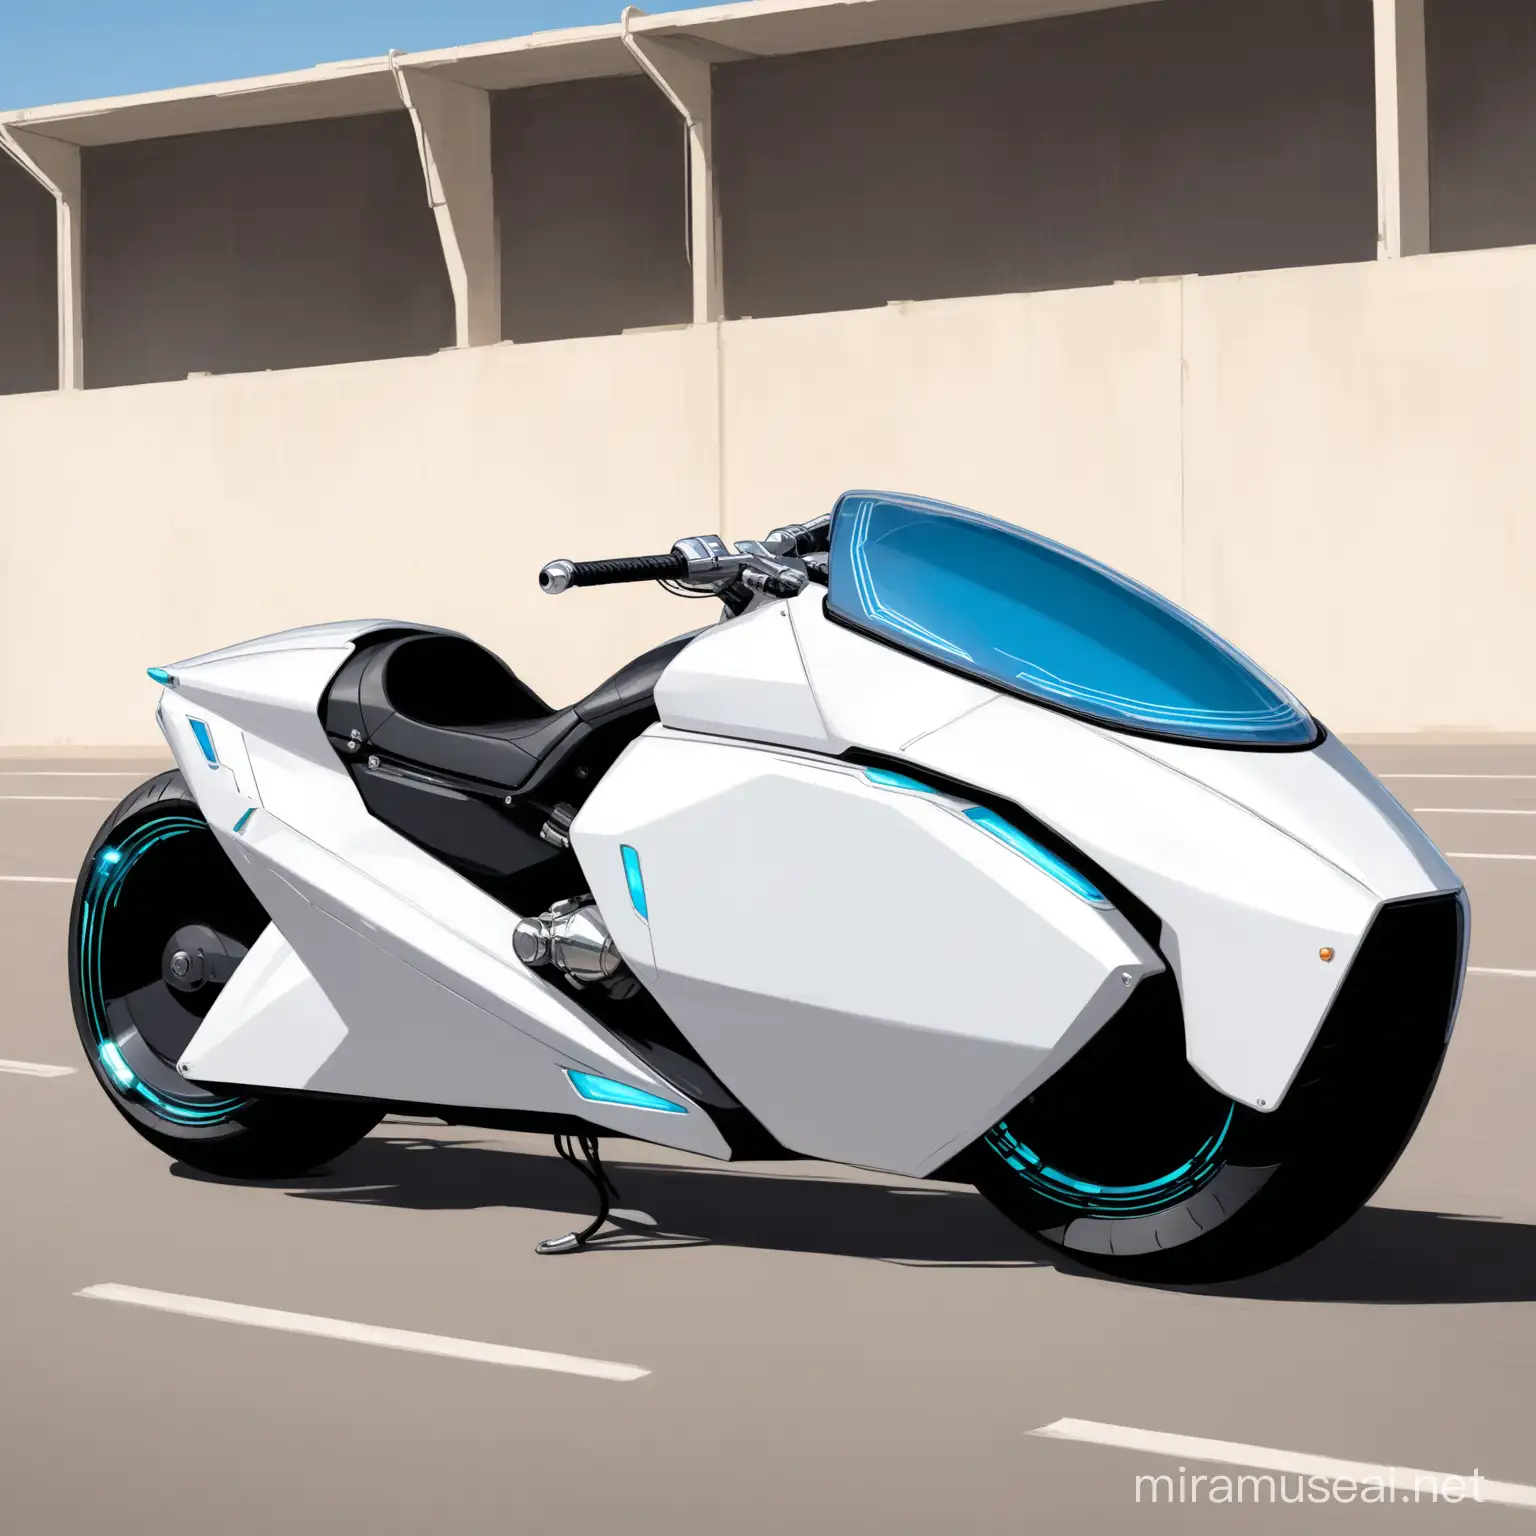 Futuristic Motorcycle Design with Advanced Technology